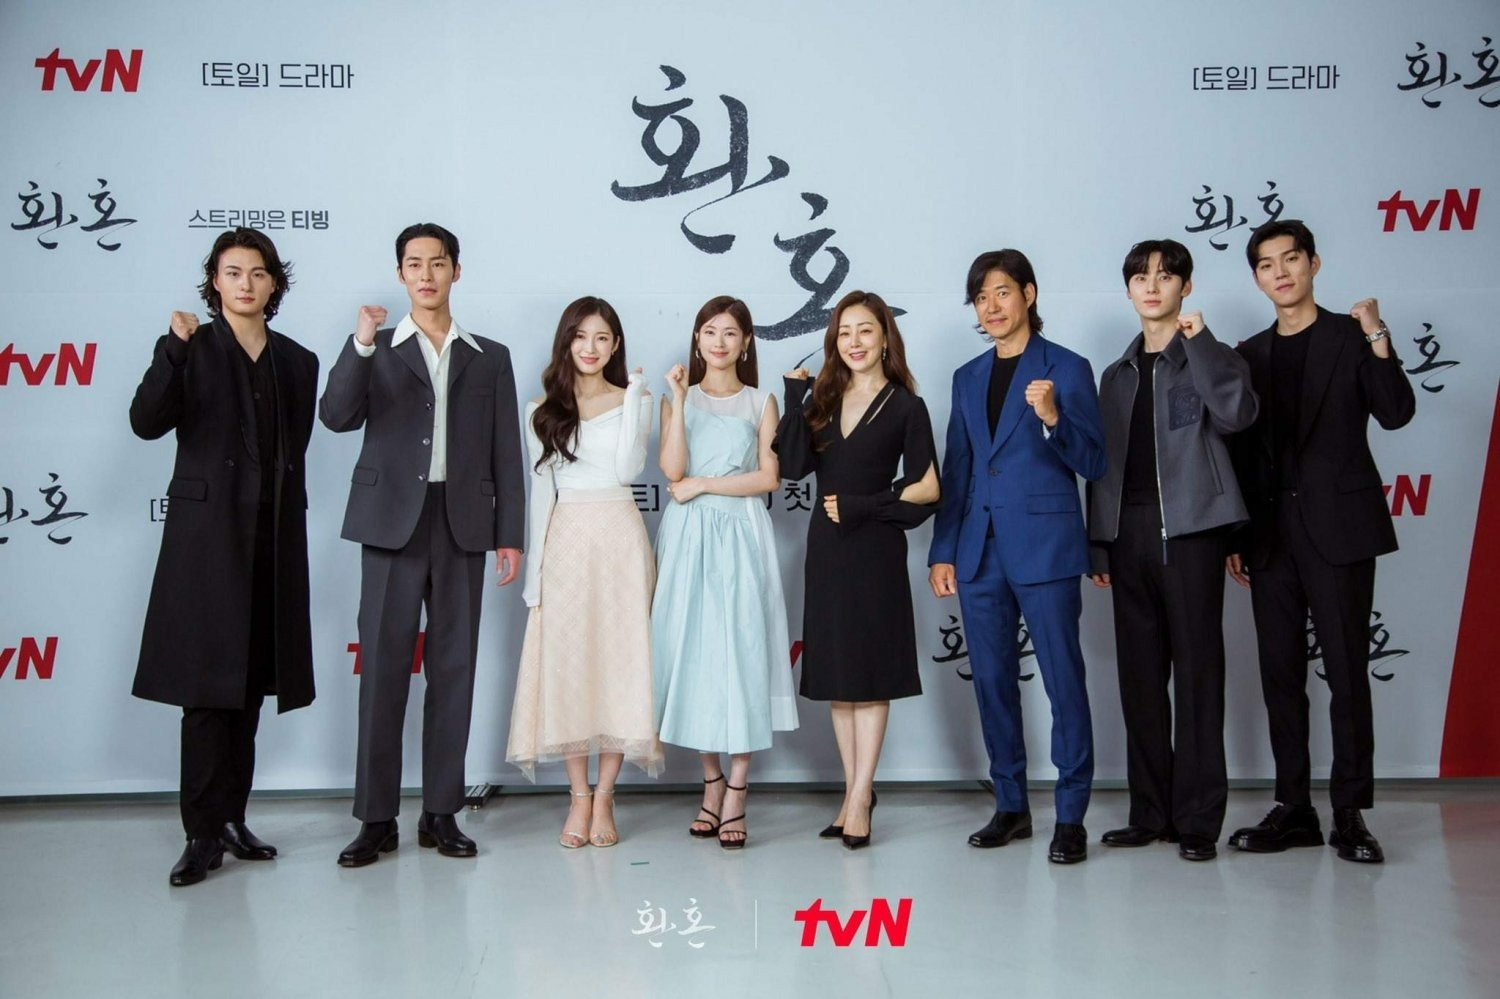 UPDATE K Drama Alchemy Of Souls Currently Ranked The 5th Most Popular Non English TV Show On Netflix